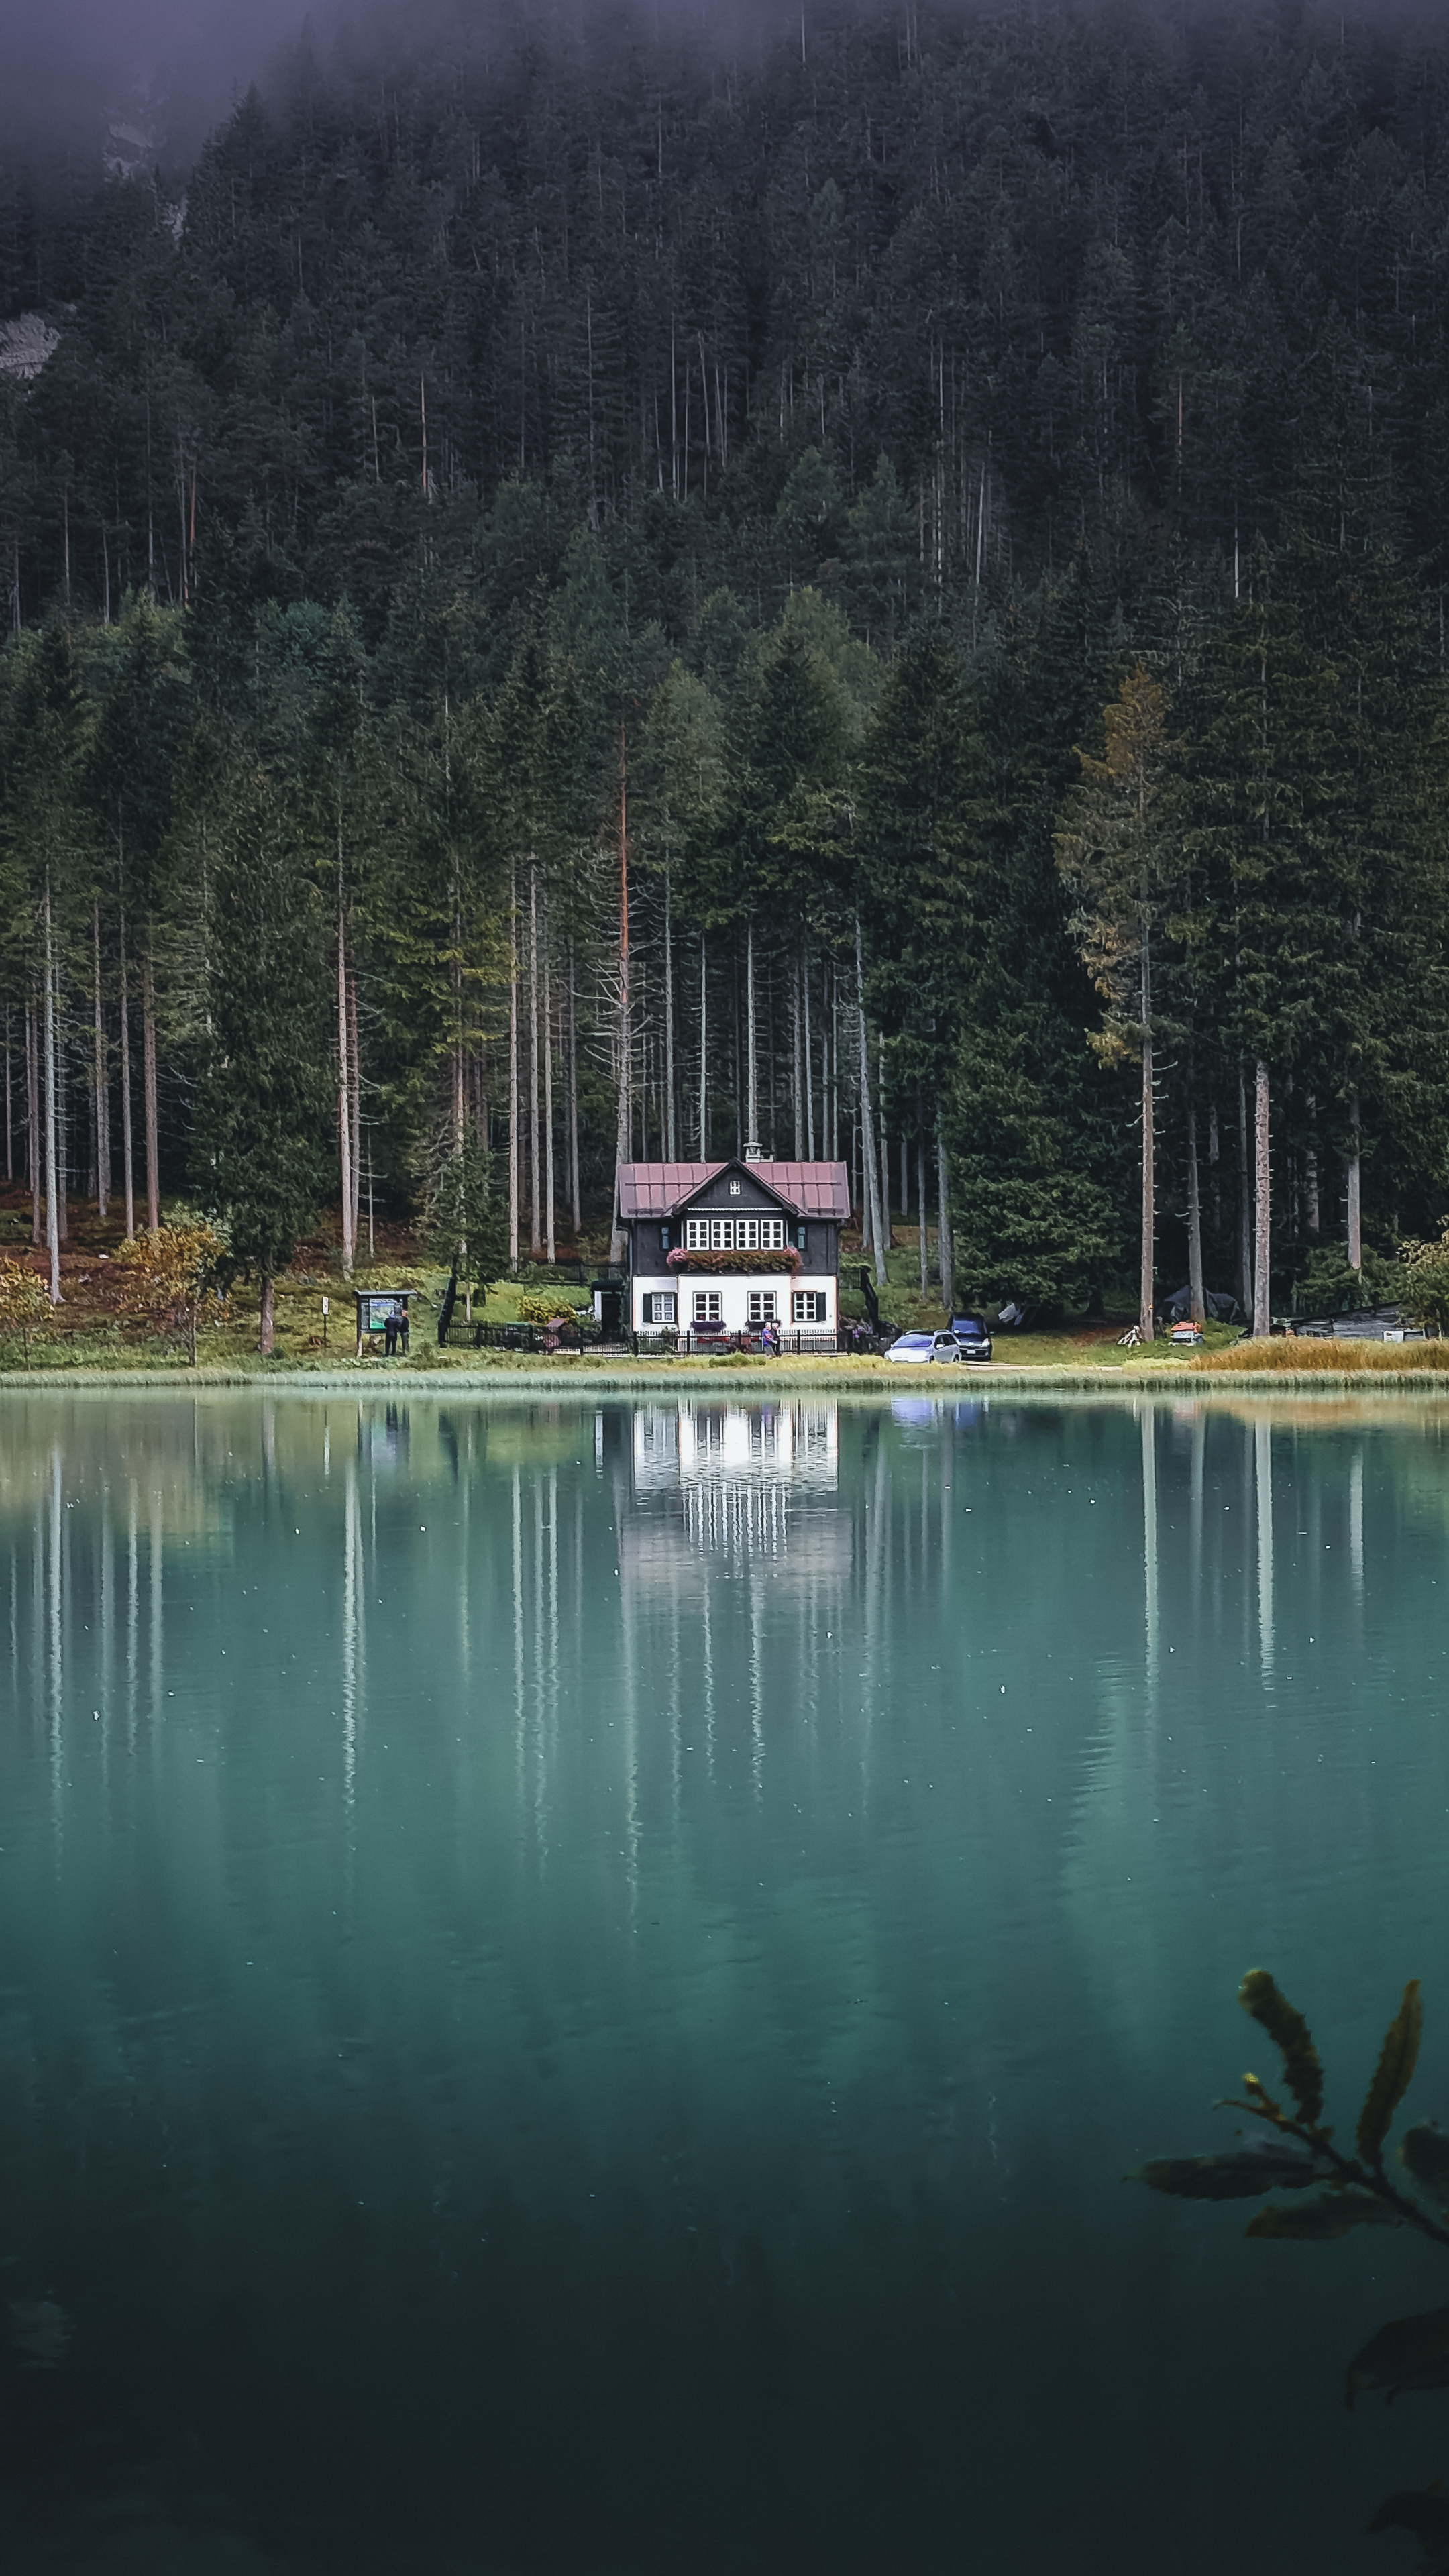 Country house, Lake shore, Serene nature, Tranquility captured, 2160x3840 4K Phone